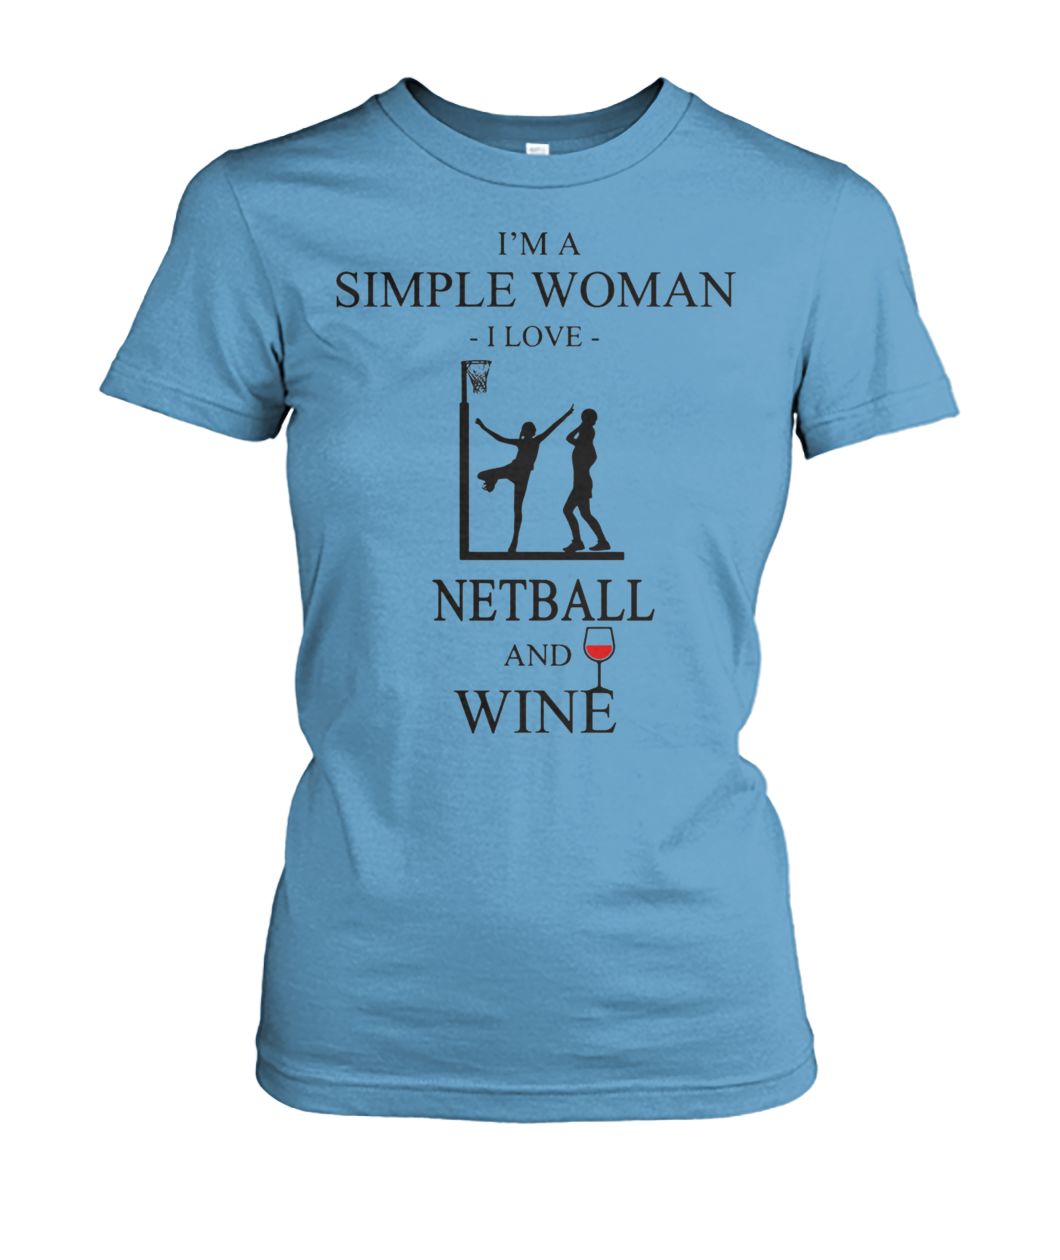 I'm a simple woman I love netball and wine women's crew tee